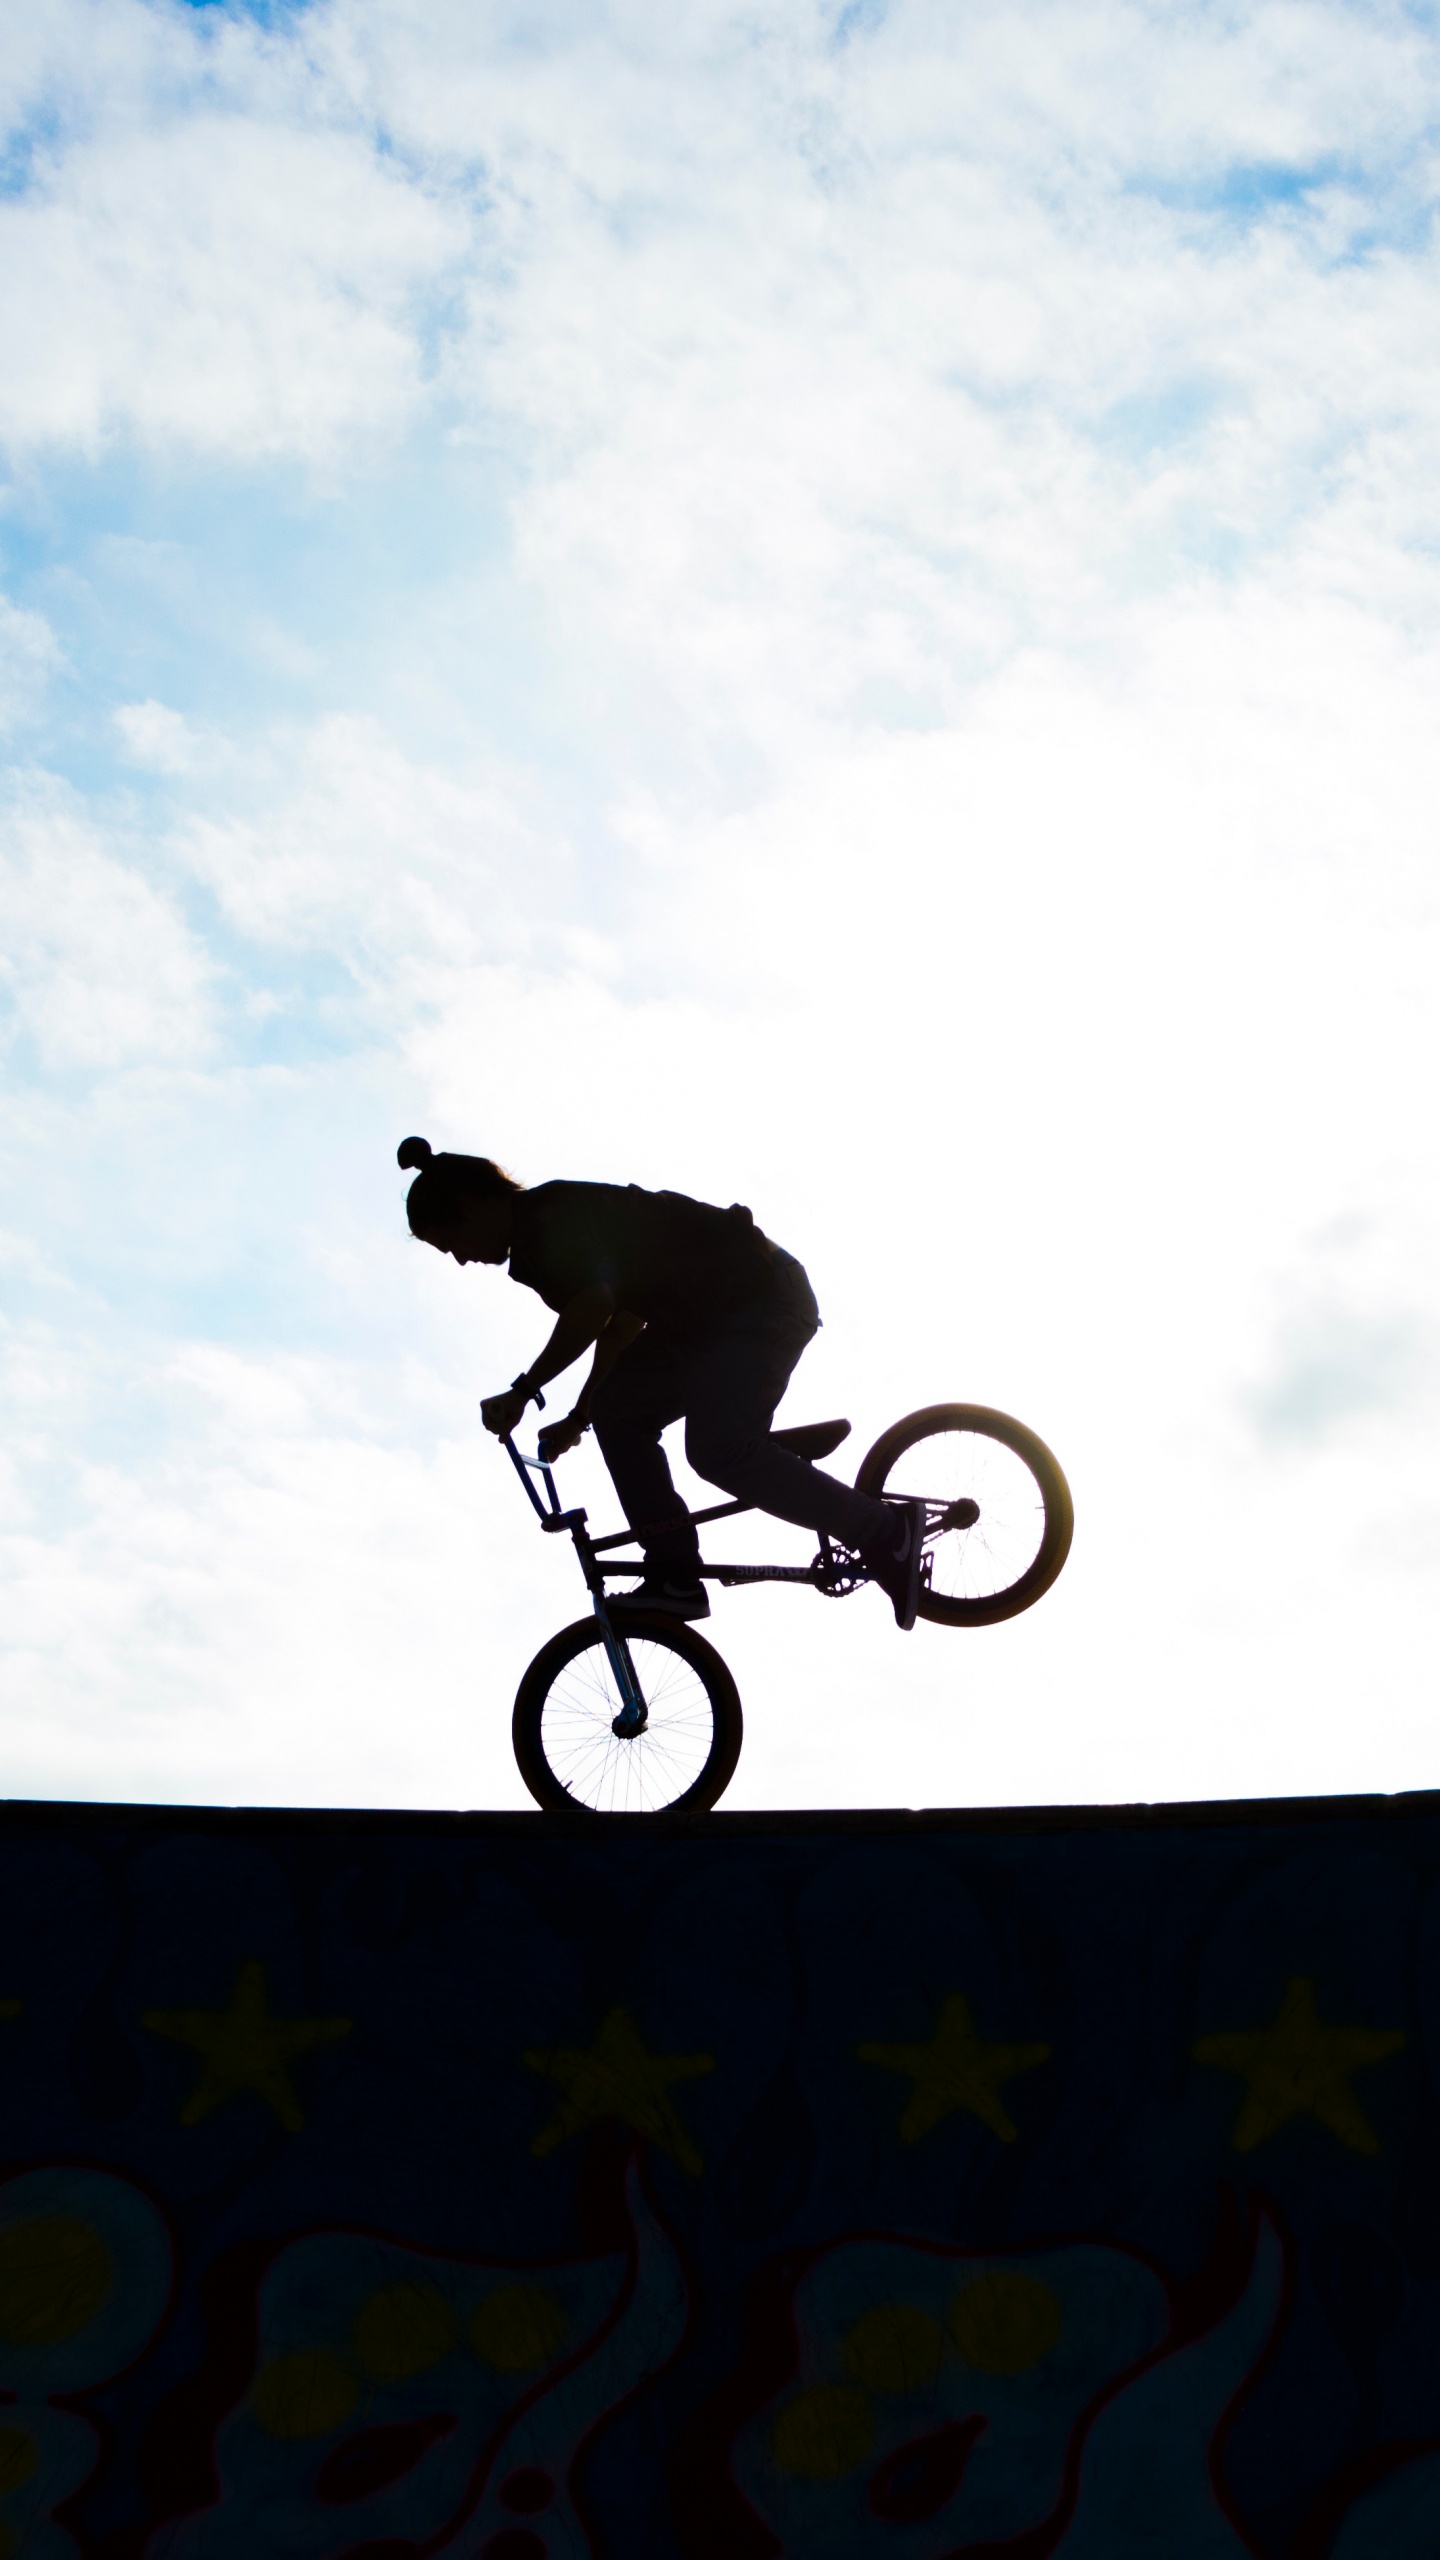 Man Riding Bicycle on Mid Air Under Blue Sky During Daytime. Wallpaper in 1440x2560 Resolution